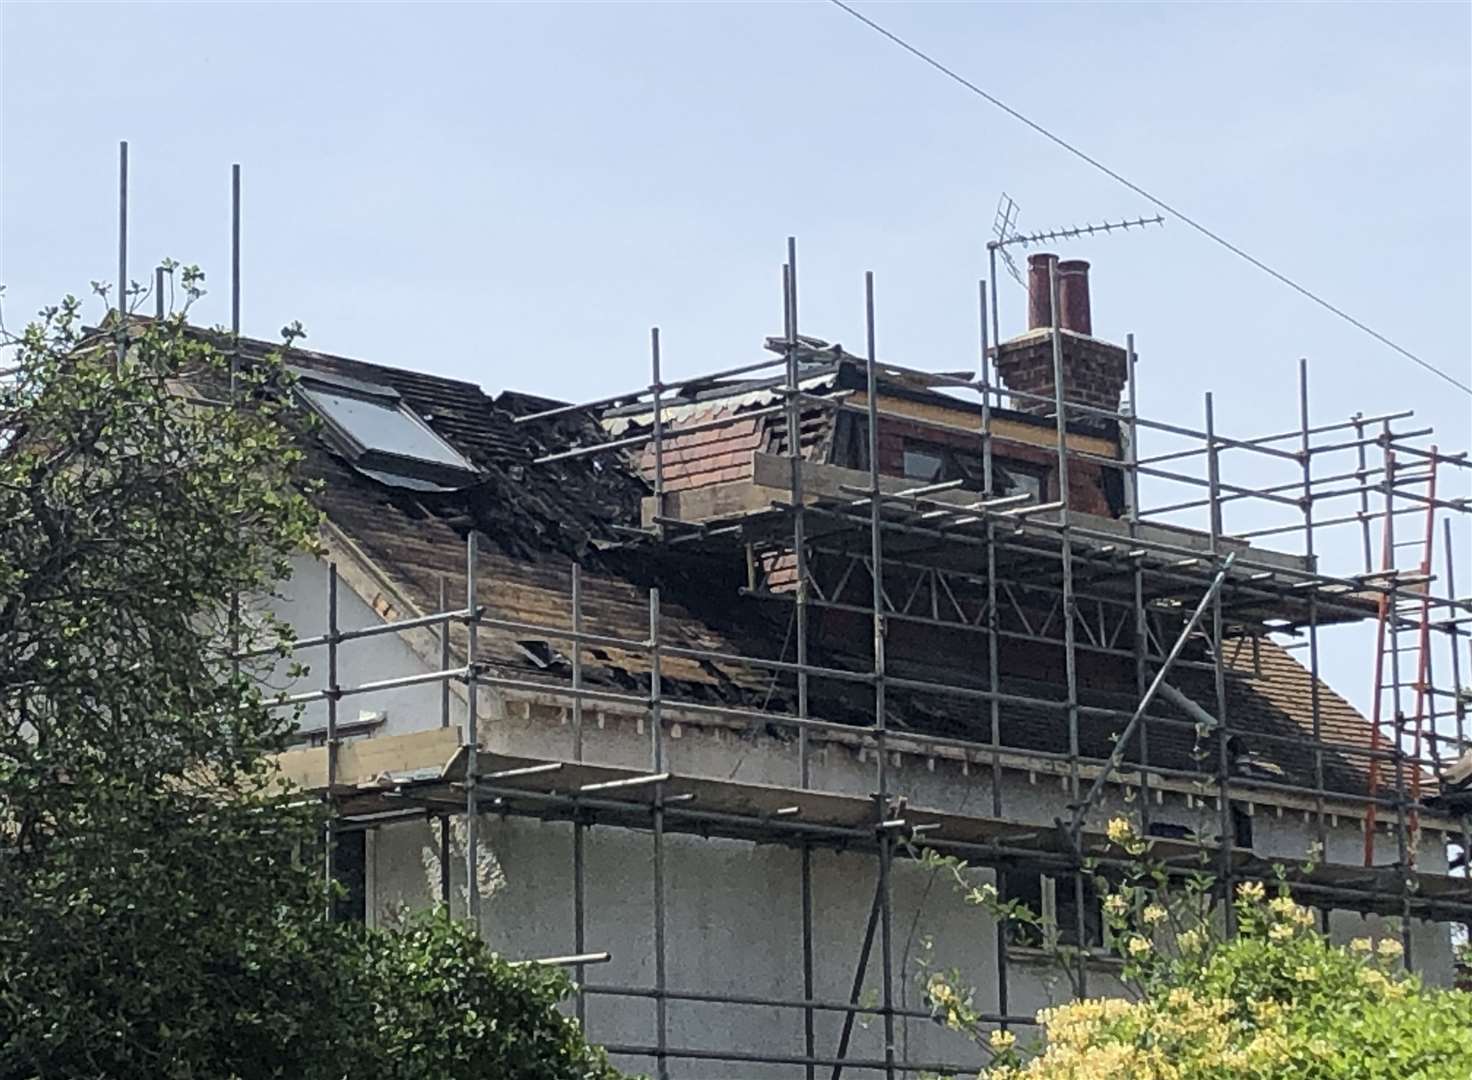 The blaze ripped through the property's roof